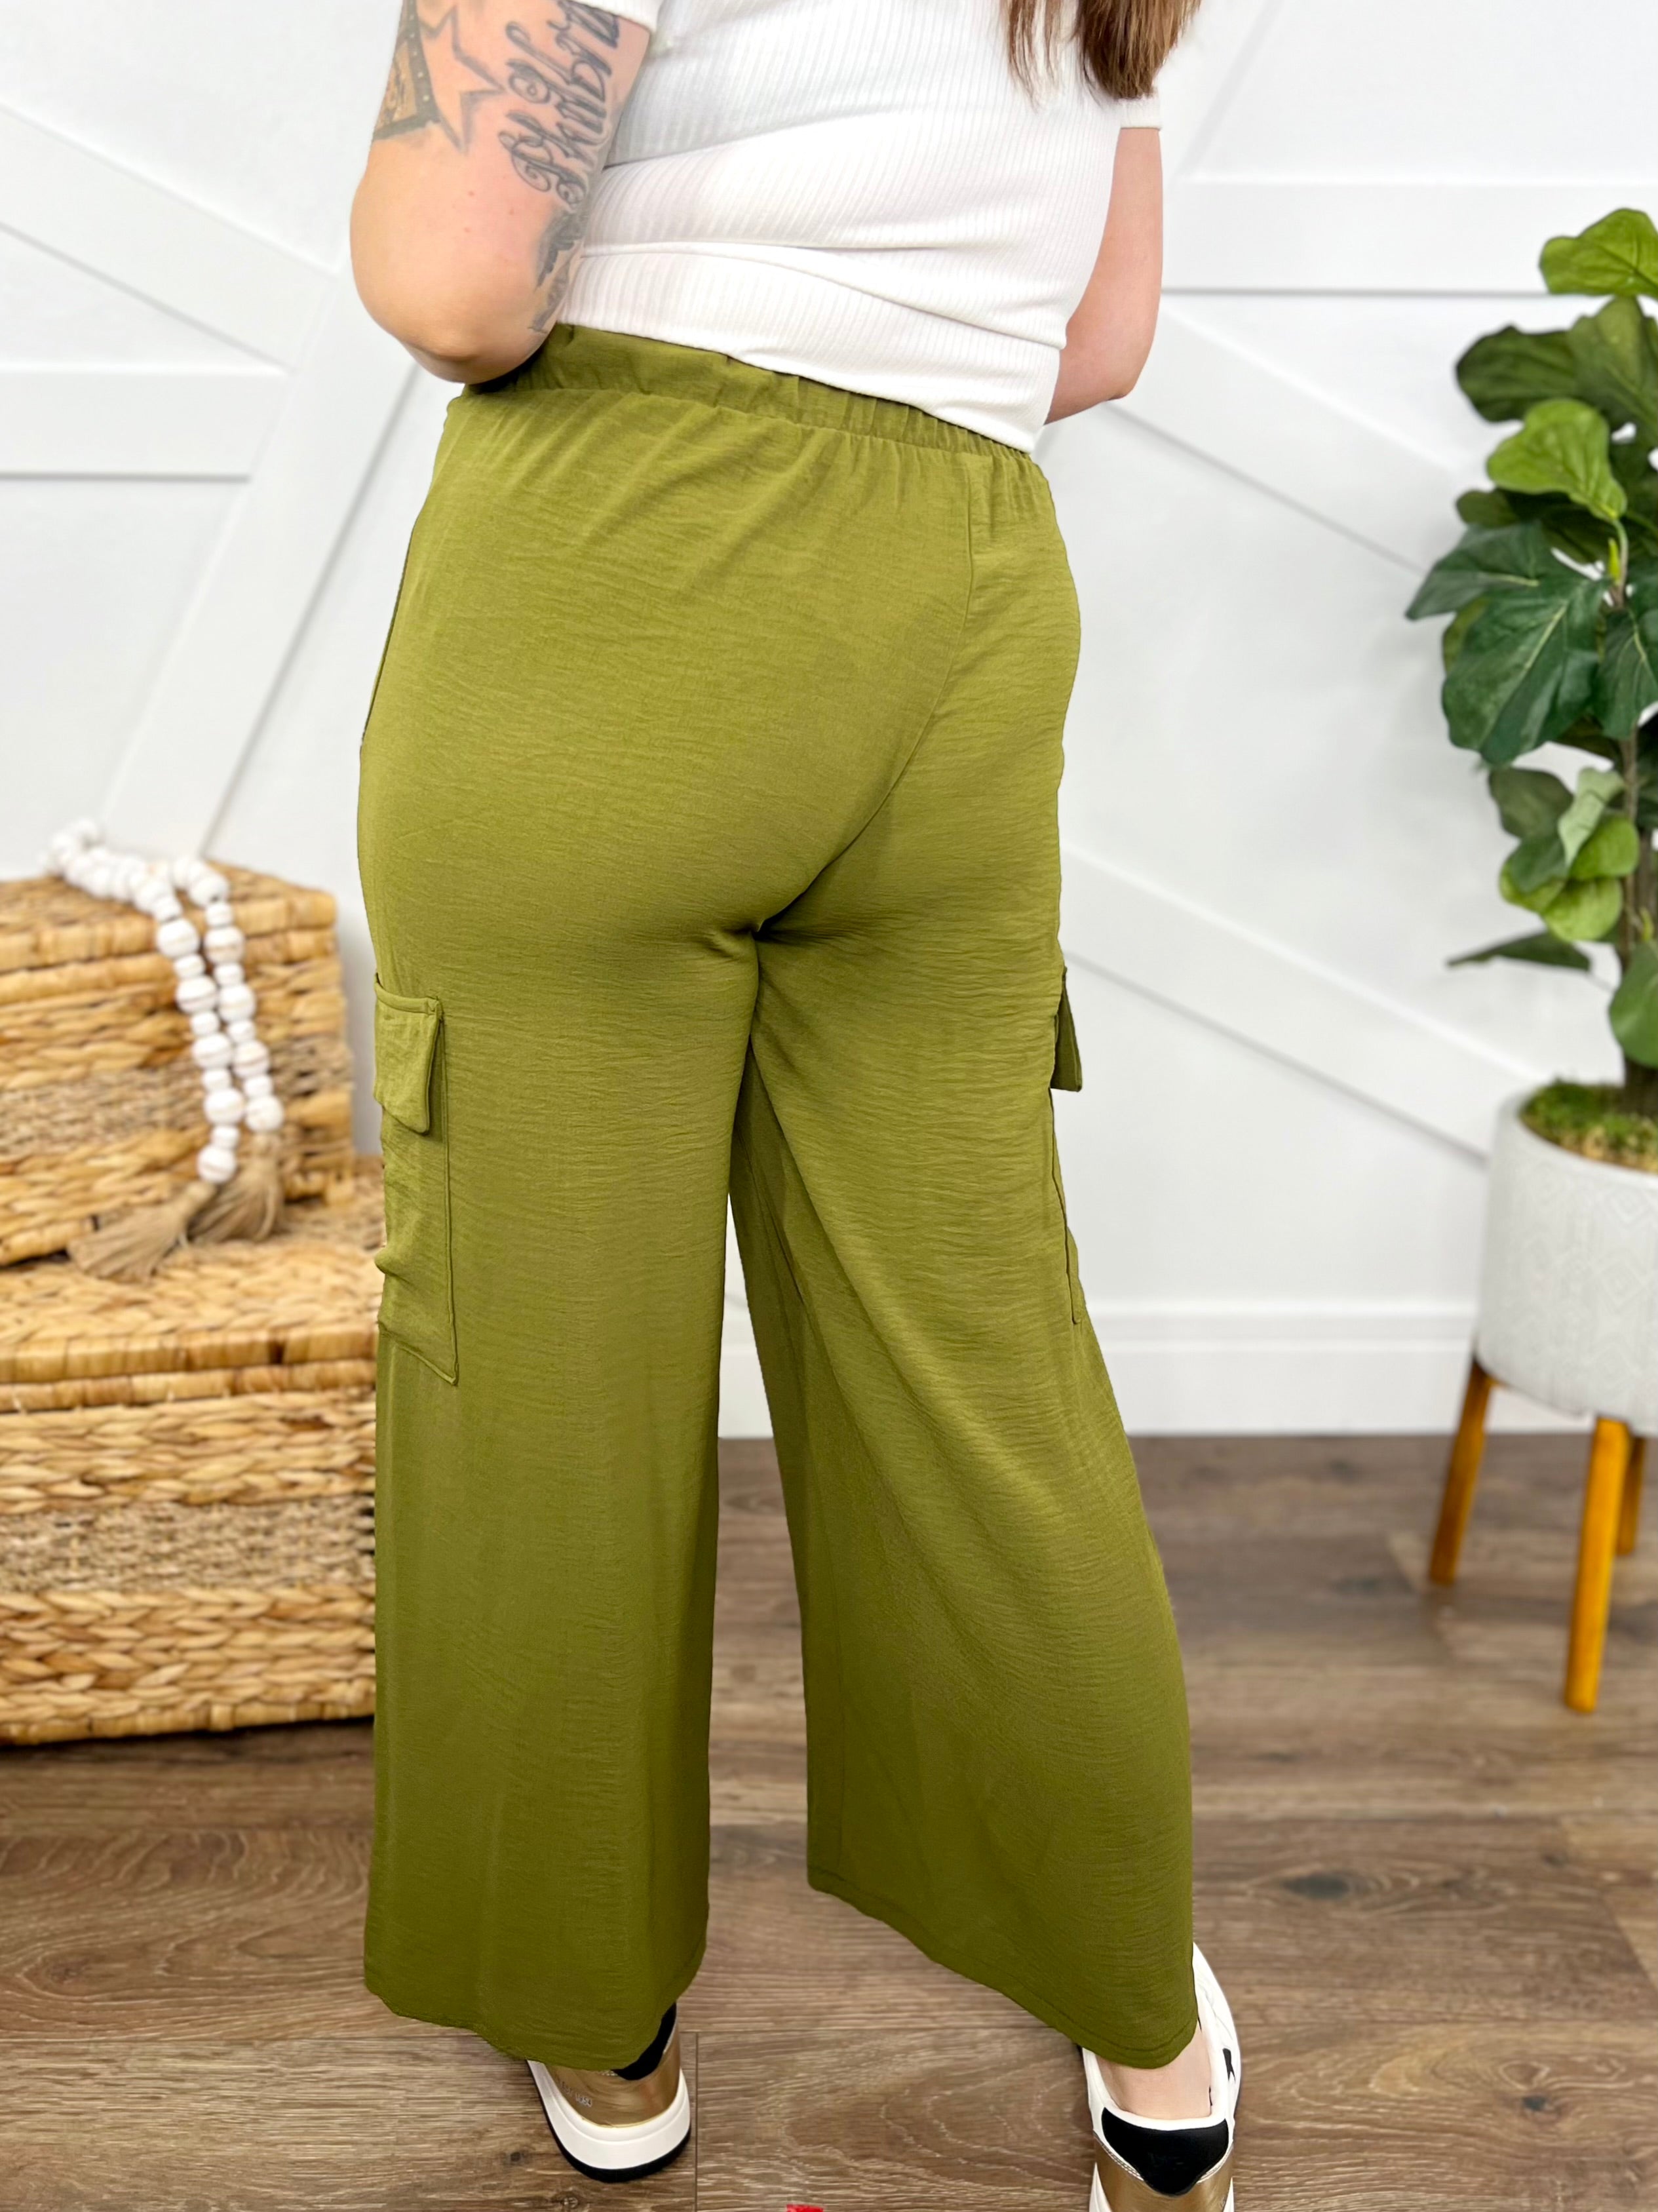 No Doubt Airflow Material Matching Bottoms-150 PANTS-STYLIVE-Heathered Boho Boutique, Women's Fashion and Accessories in Palmetto, FL